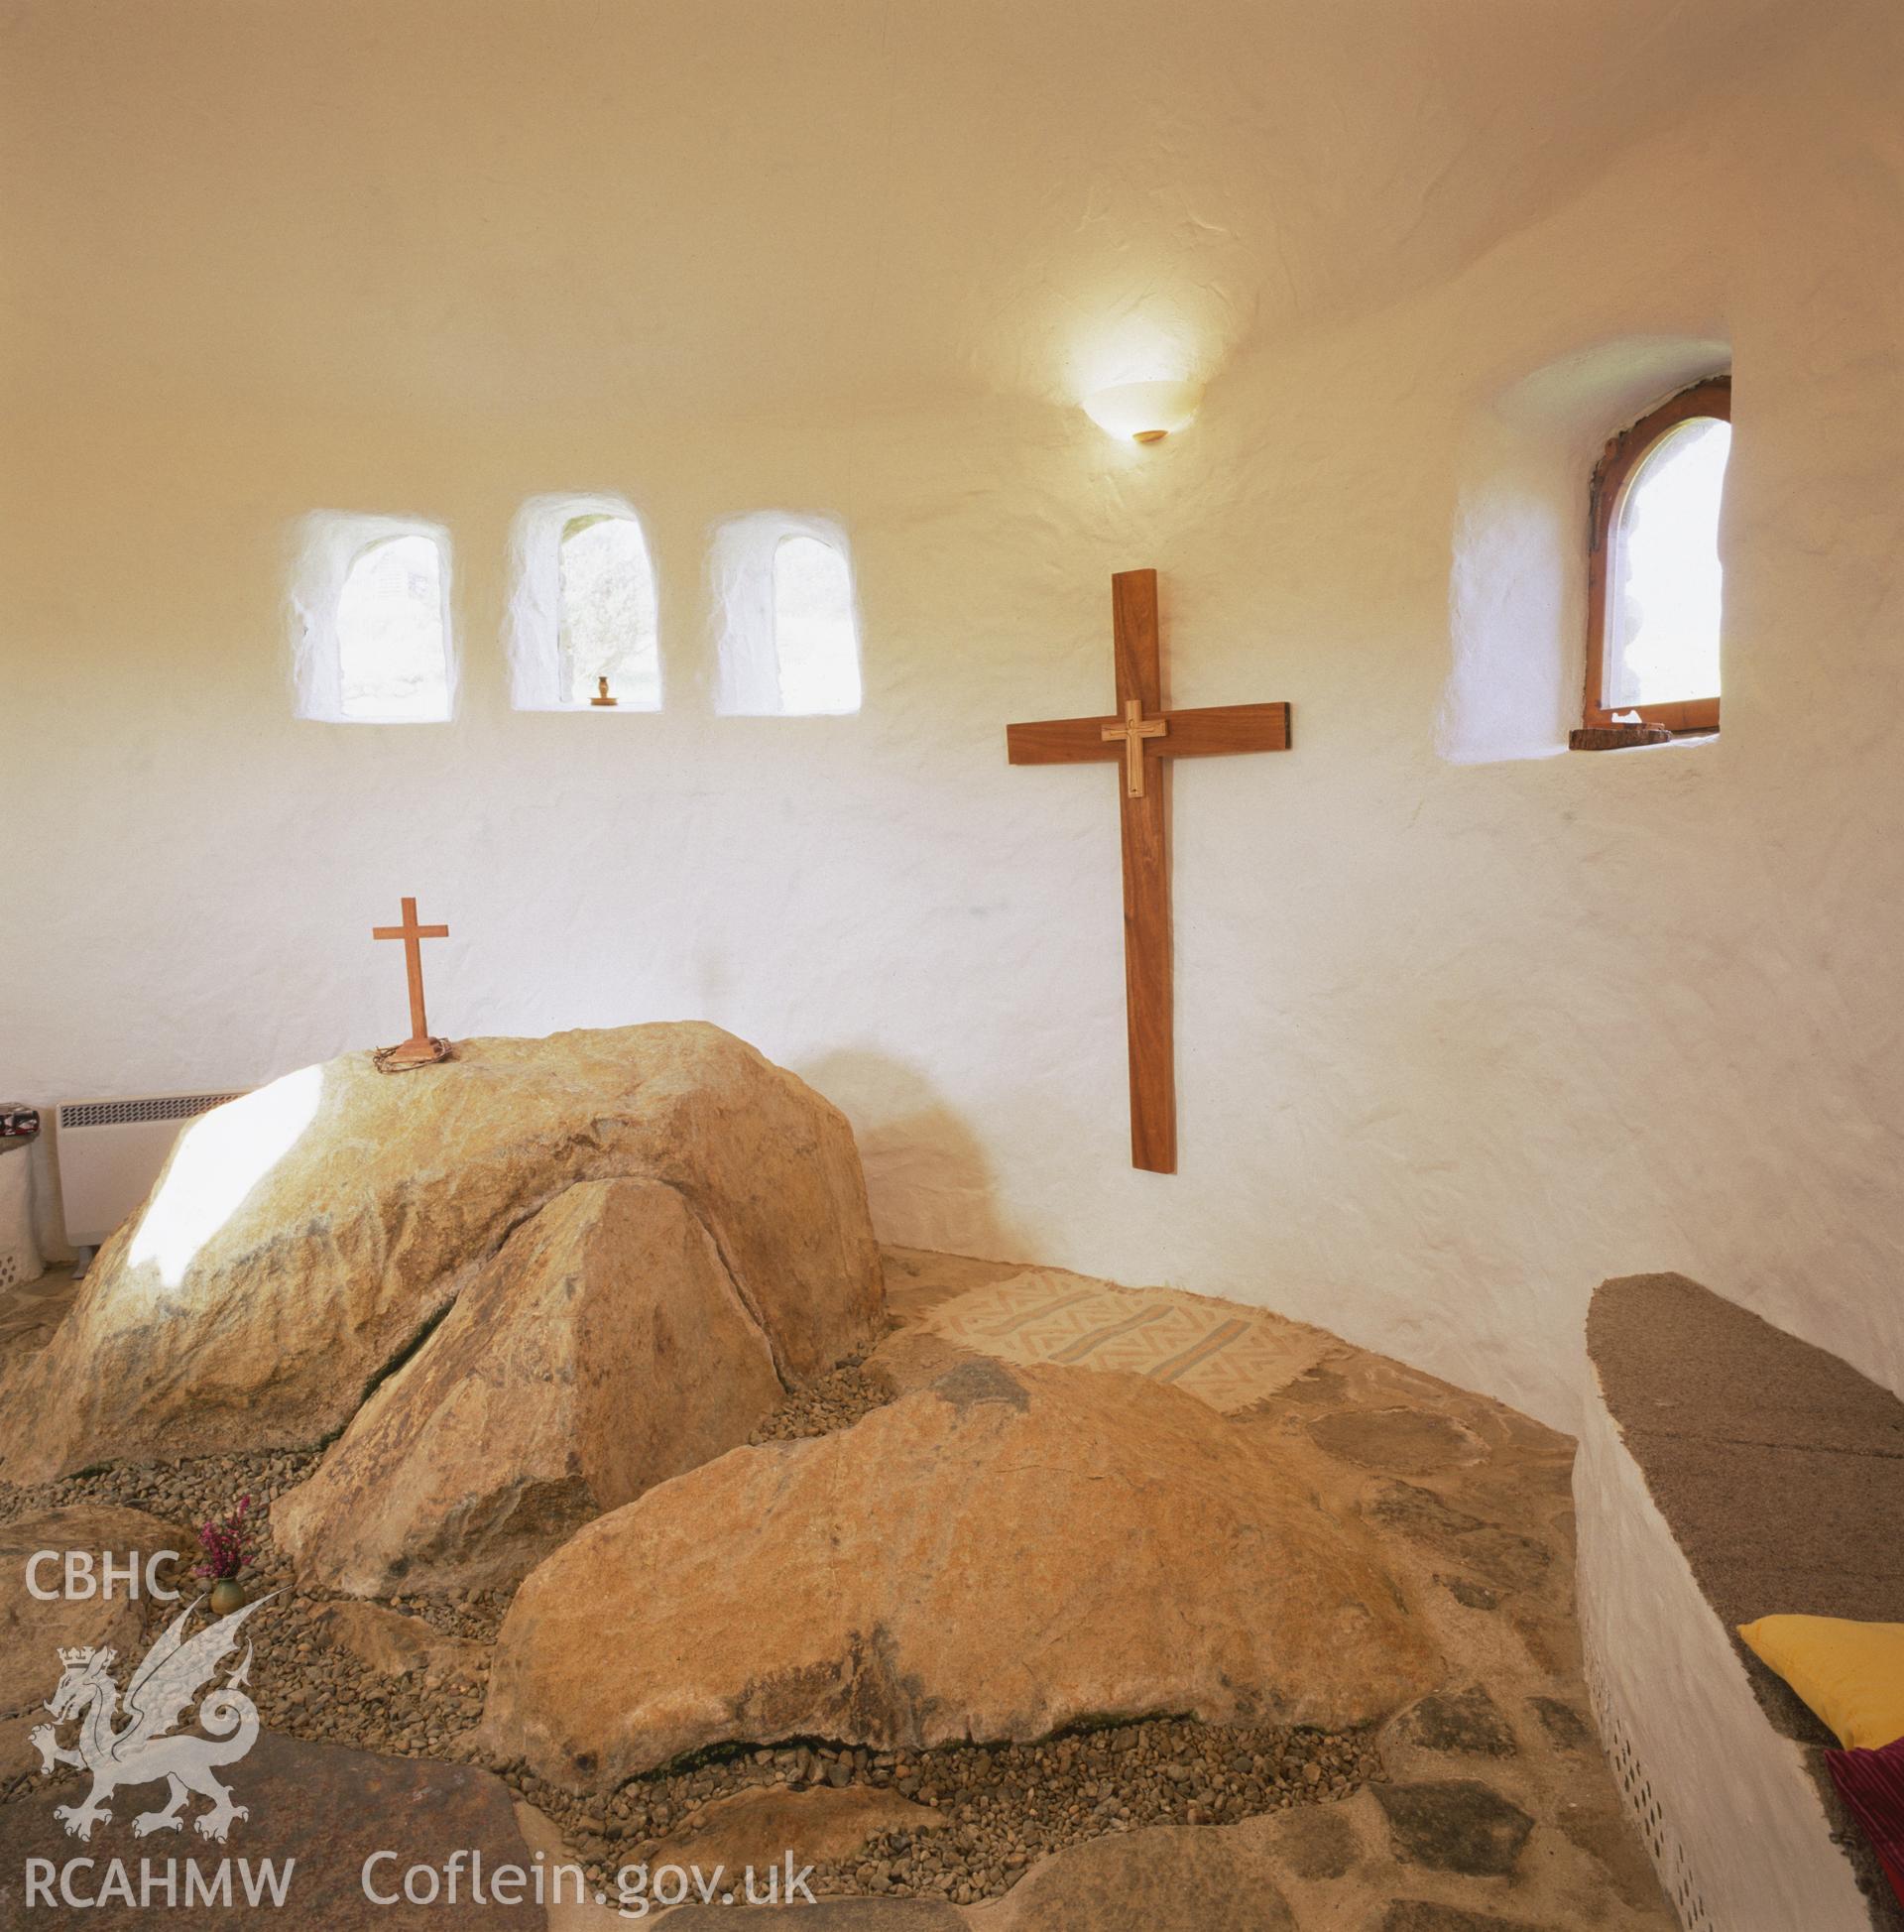 RCAHMW colour transparency showing interior view of Ffald-y-brenin chapel, taken by Iain Wright, 2003.